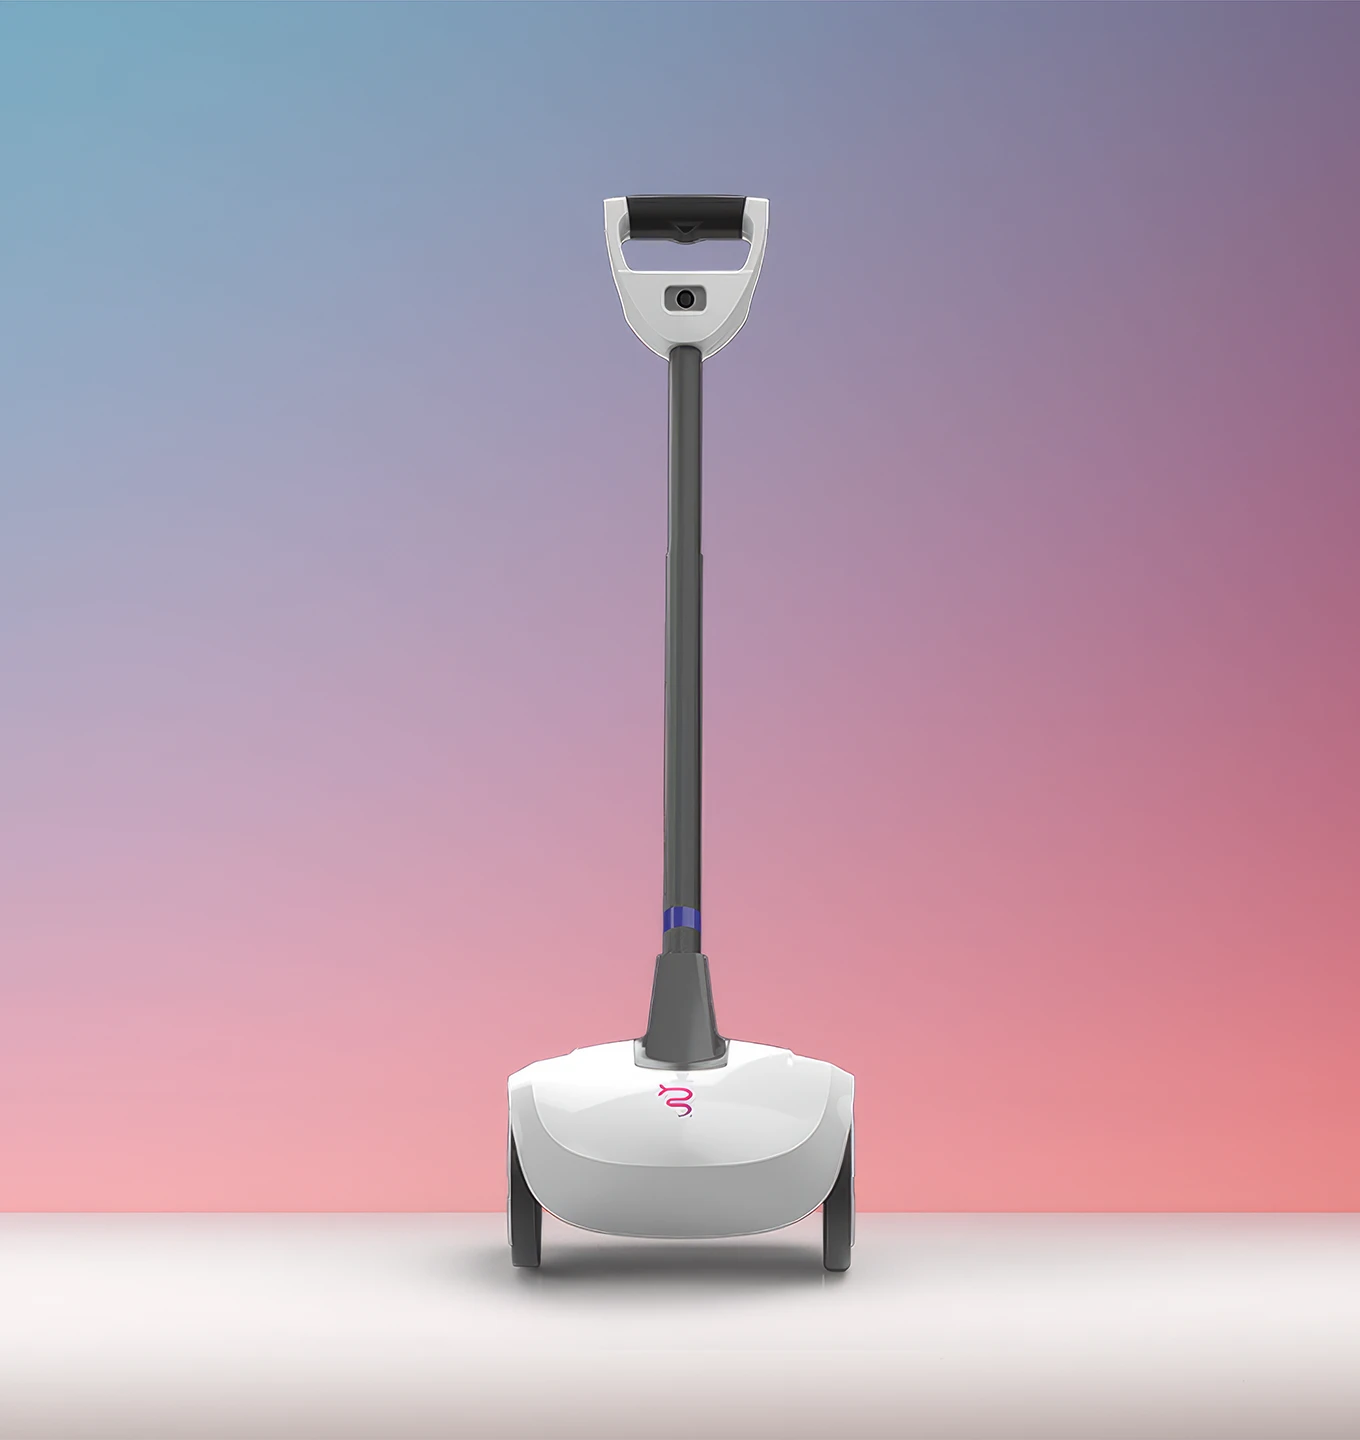 Photo of the Glide mobility assistant.